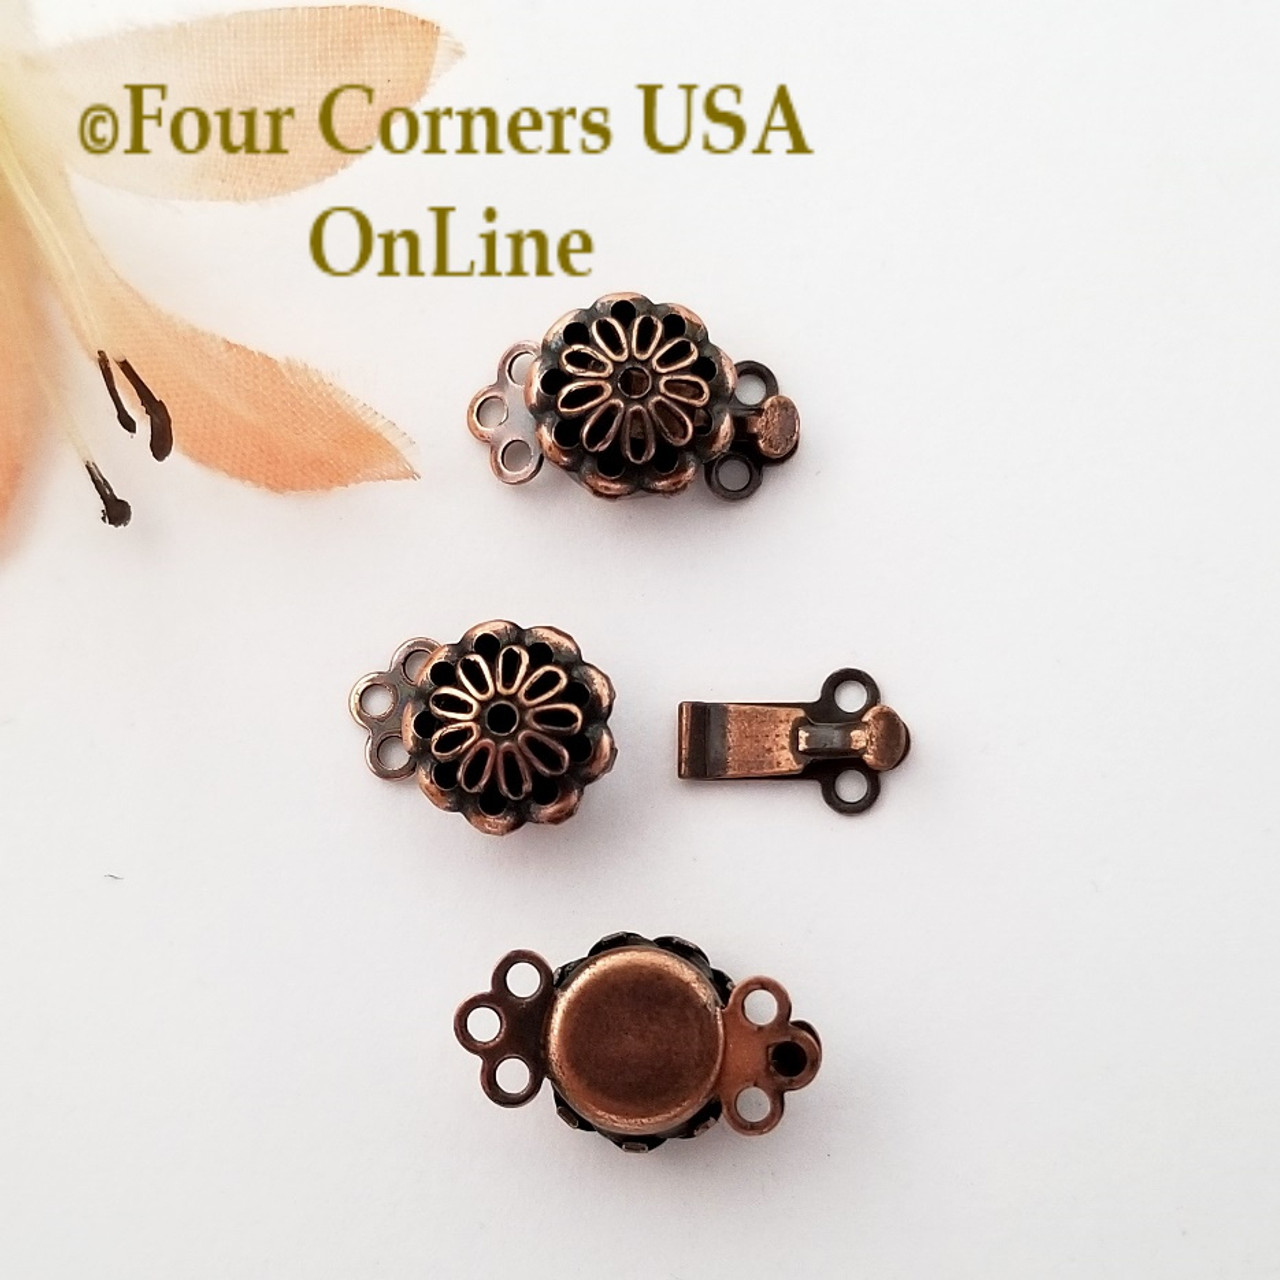 Copper Triple Strand Slide Clasp Jewelry Finding 10 Clasps Closeout Final  Sale BDZ-2116 - Four Corners USA Online